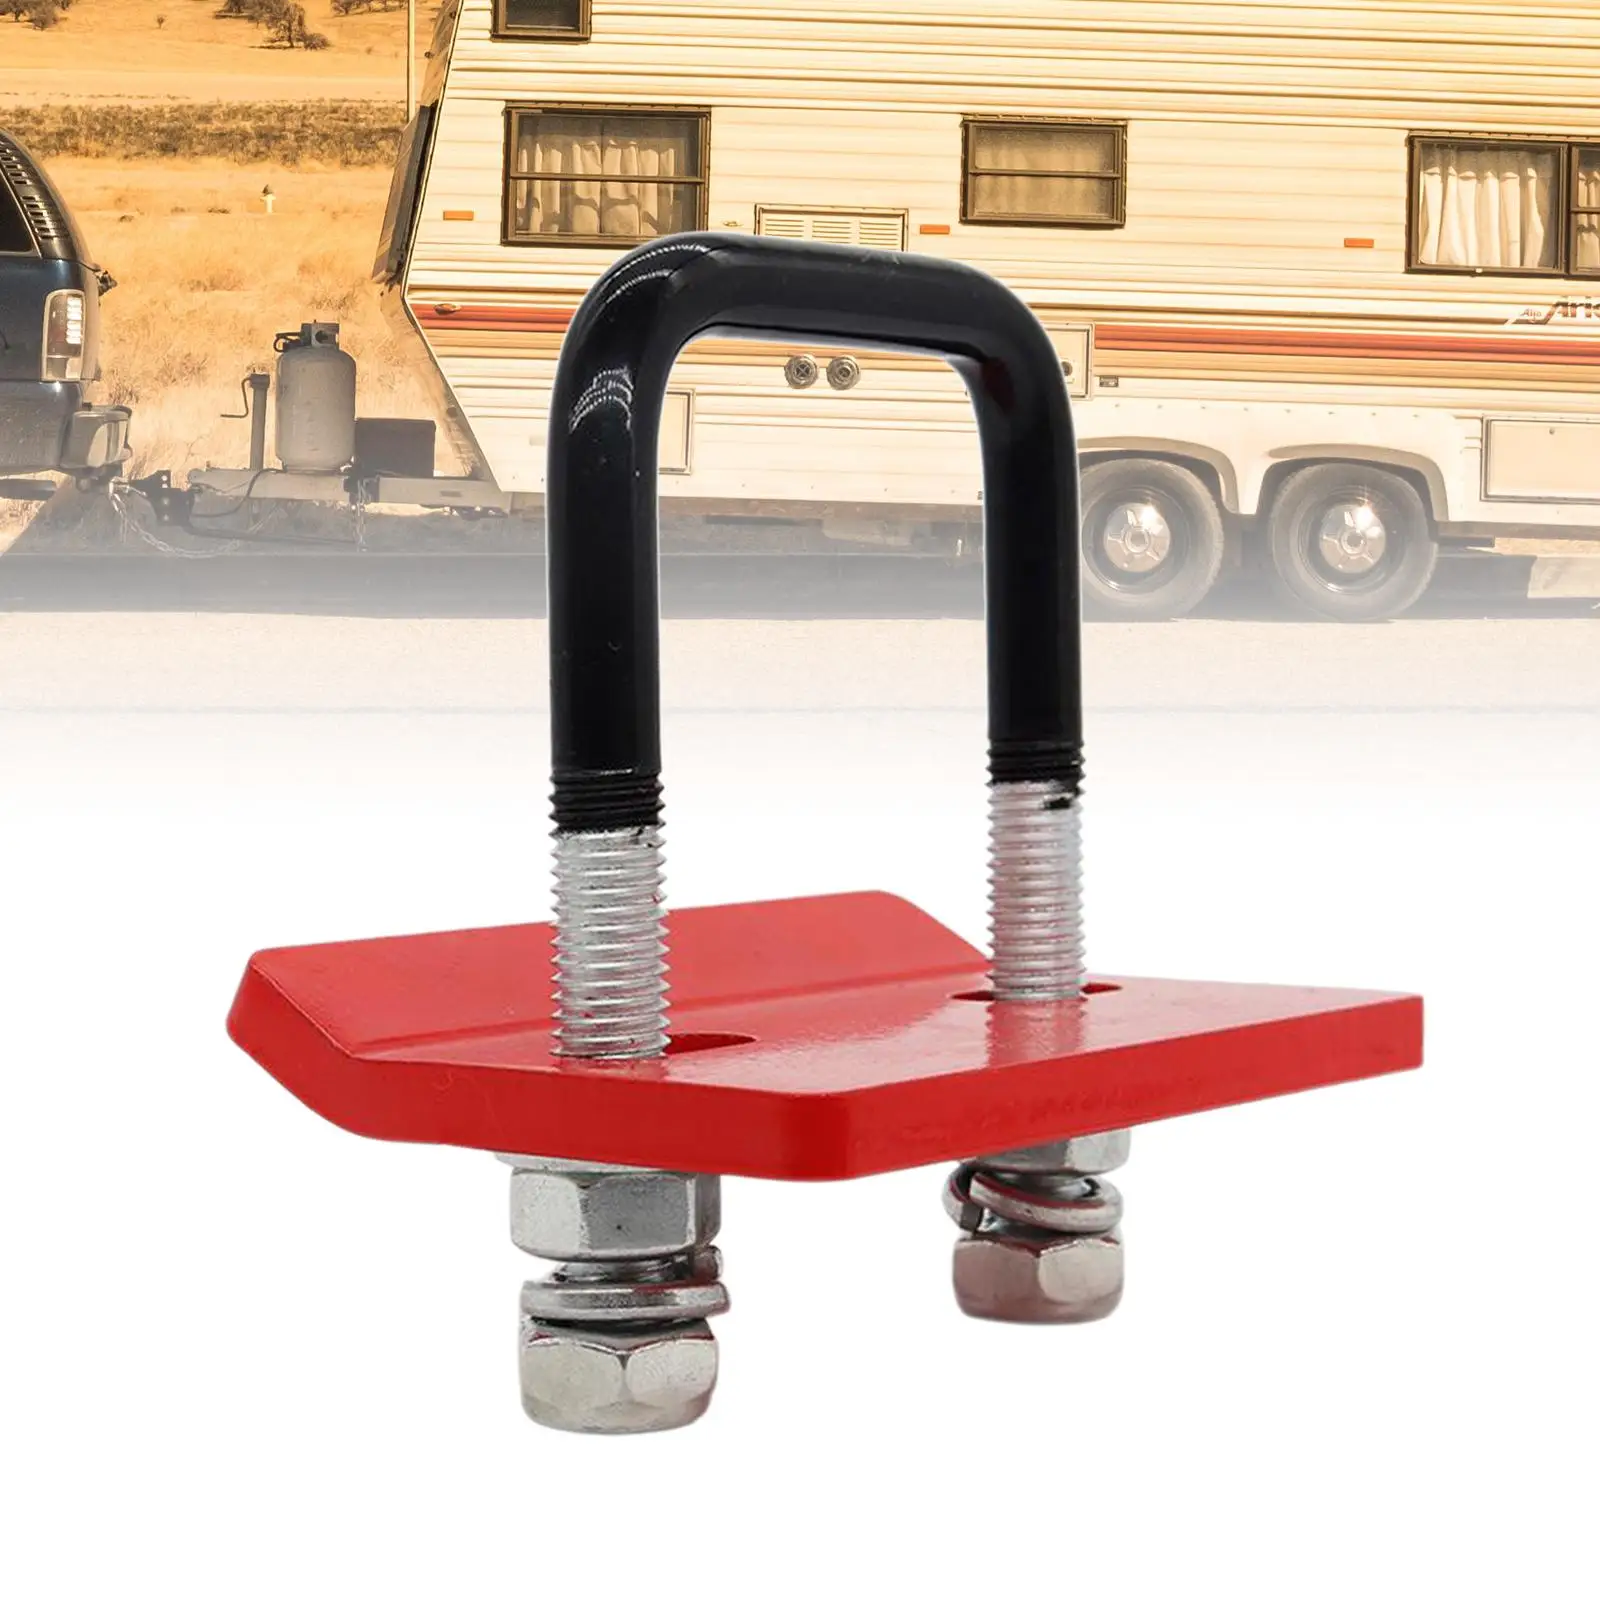 Alloy Steel Hitch Tightener Accessories Heavy Duty Trailer Hitches Clamp Anti Rattle Stabilizer for Bike Rack Trailer Ball Mount